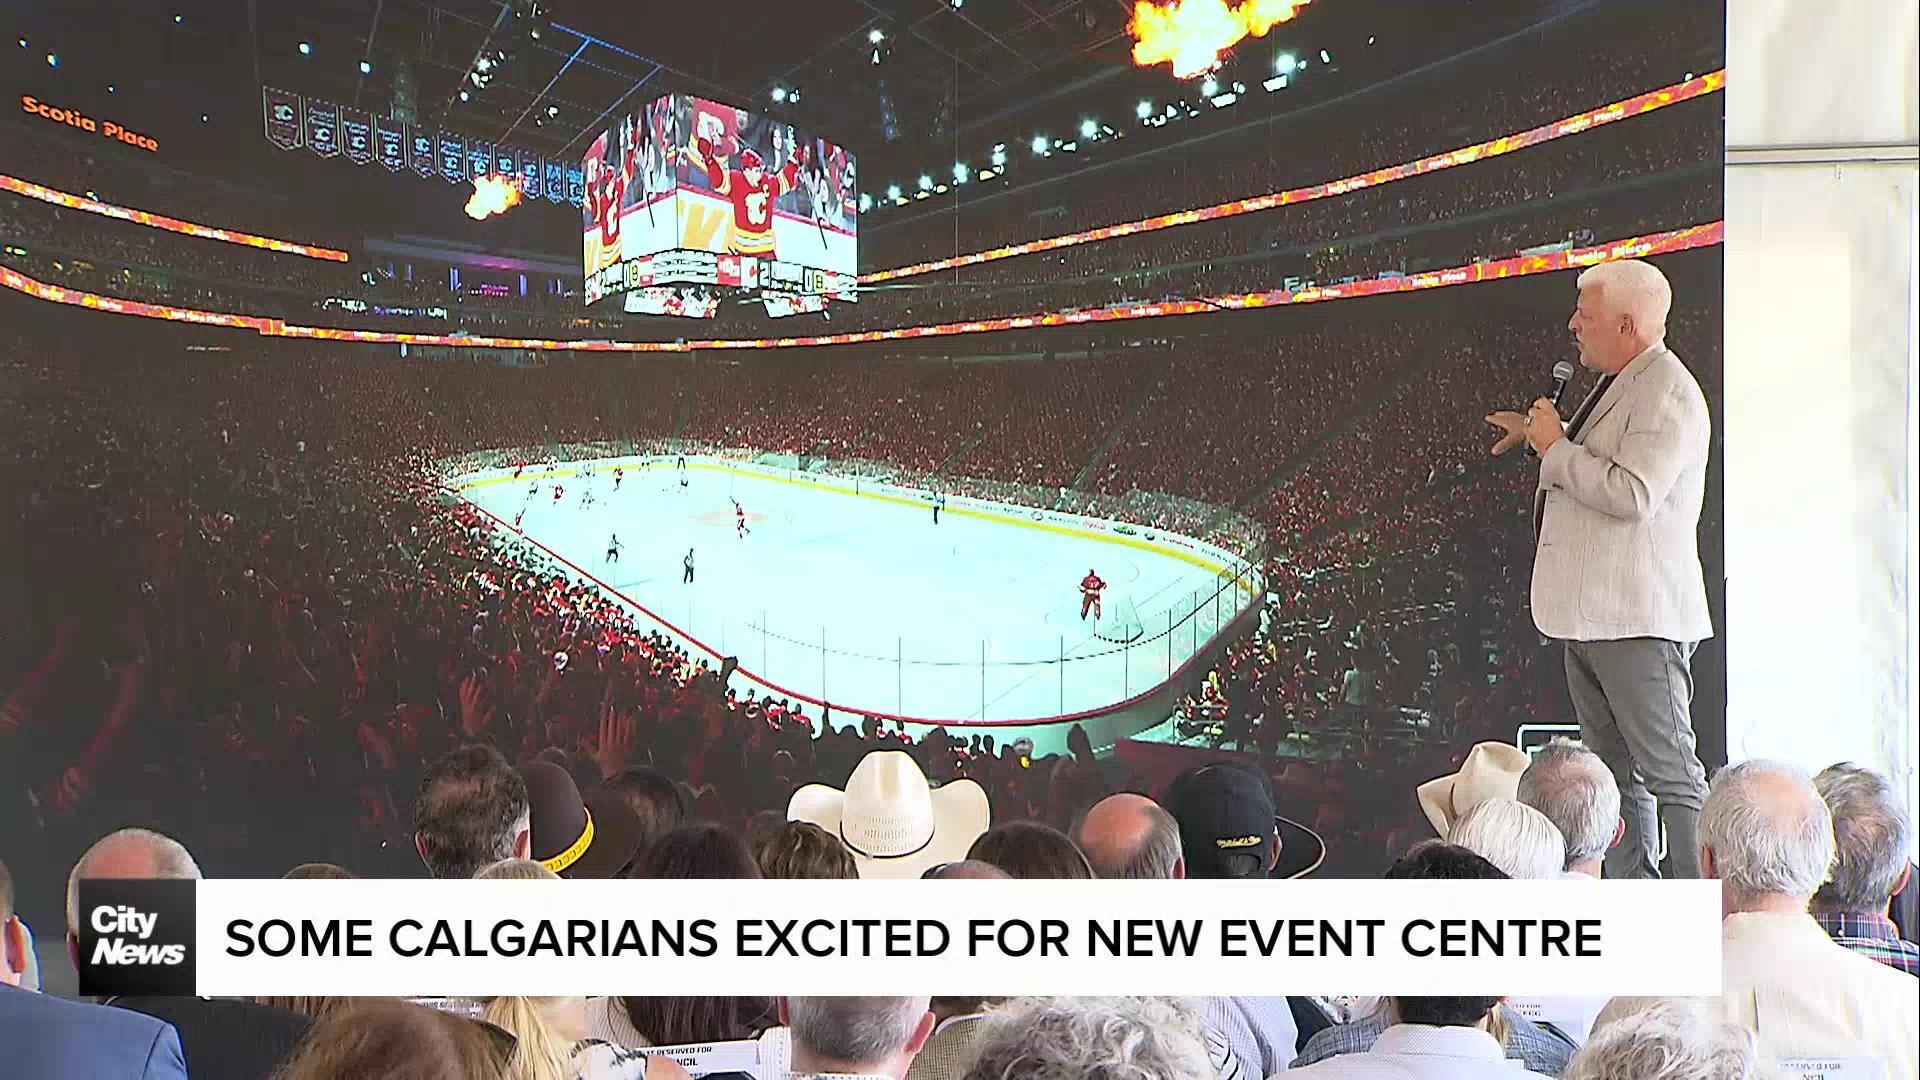 Some Calgarians excited for new event centre